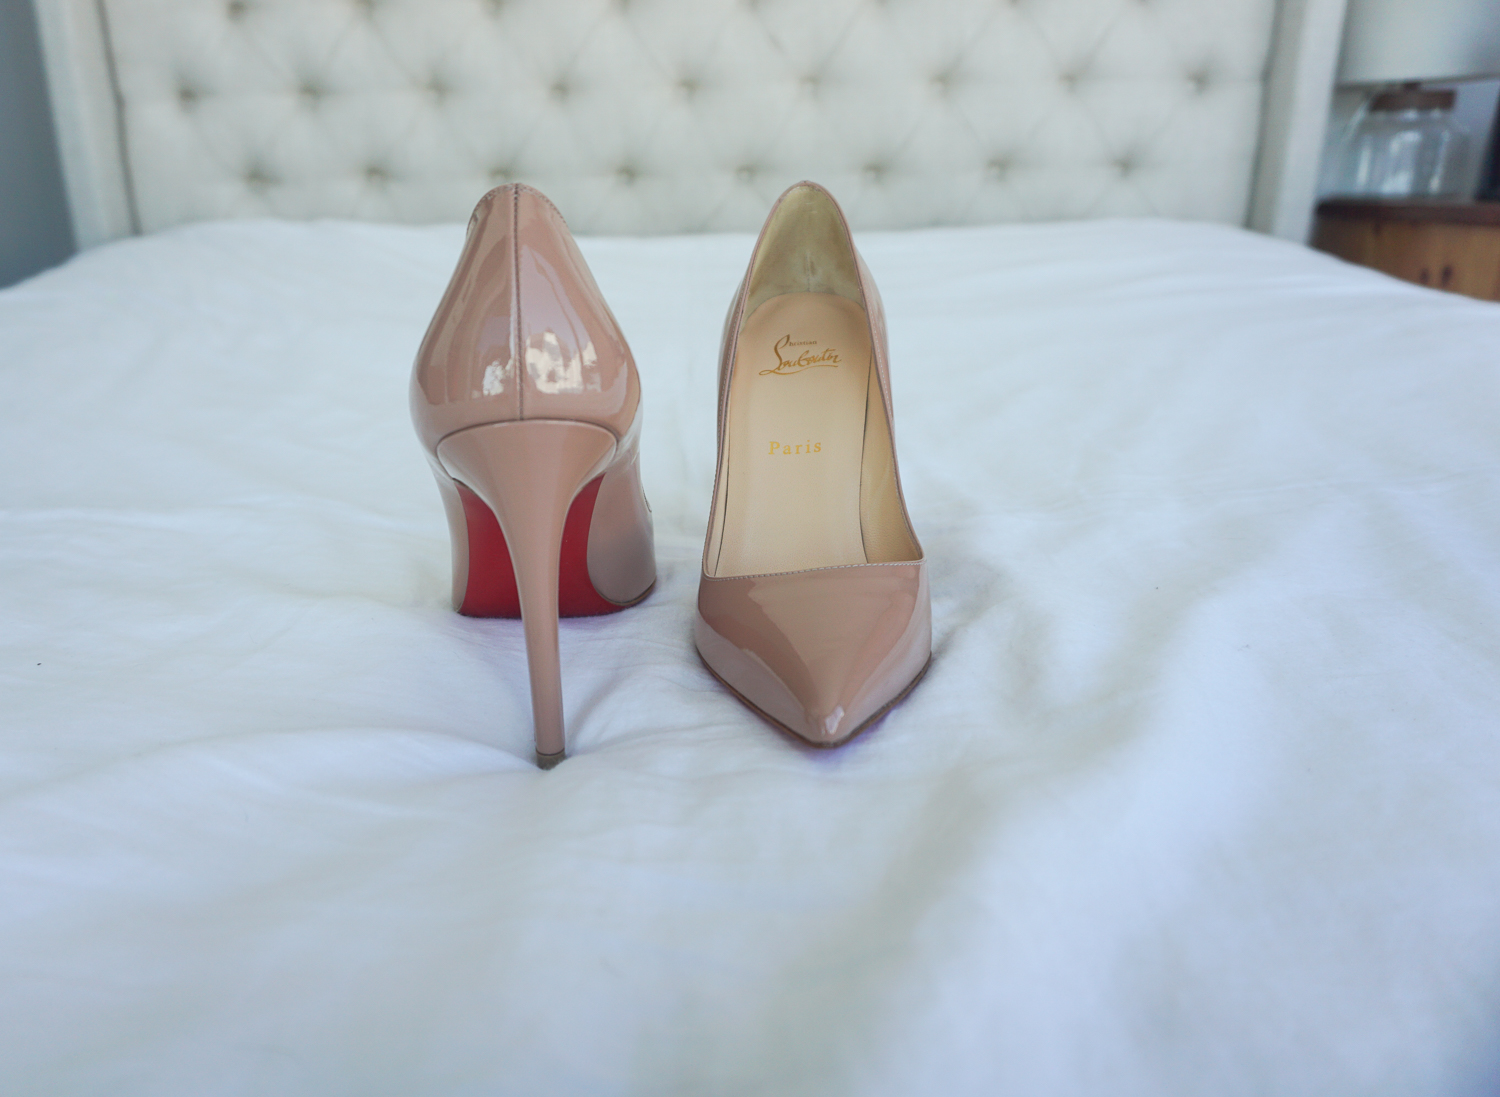 9 Louboutin shoes price ideas  louboutin shoes price, heels, shoes